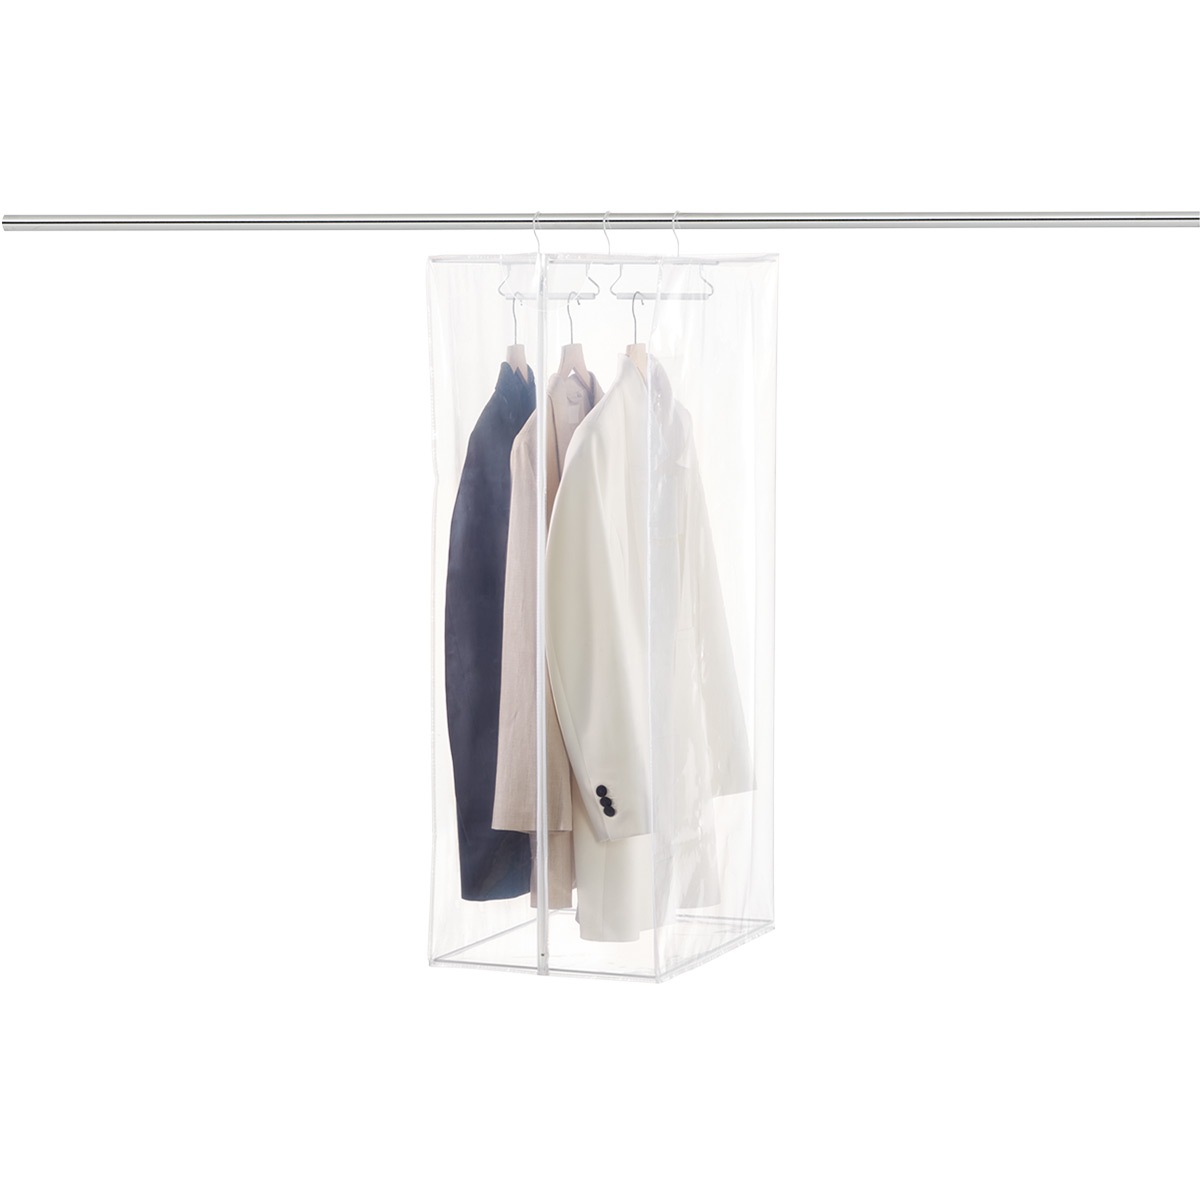 https://www.containerstore.com/catalogimages/480387/10051992-peva-hanging-suit-bag-clear.jpg